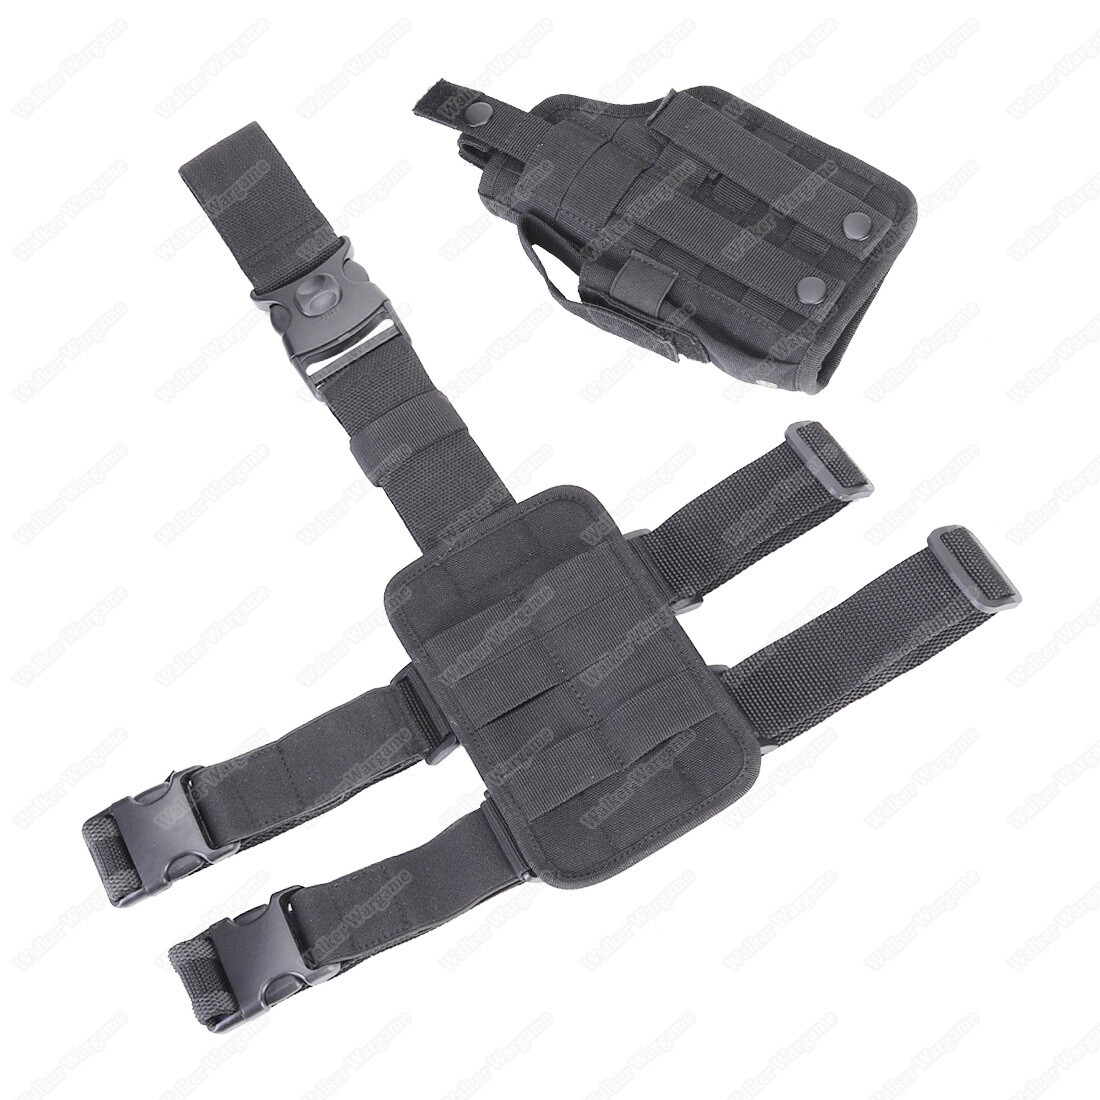 WF007 Drop Leg Molle Pistol Holster - Left hand and Right Hand